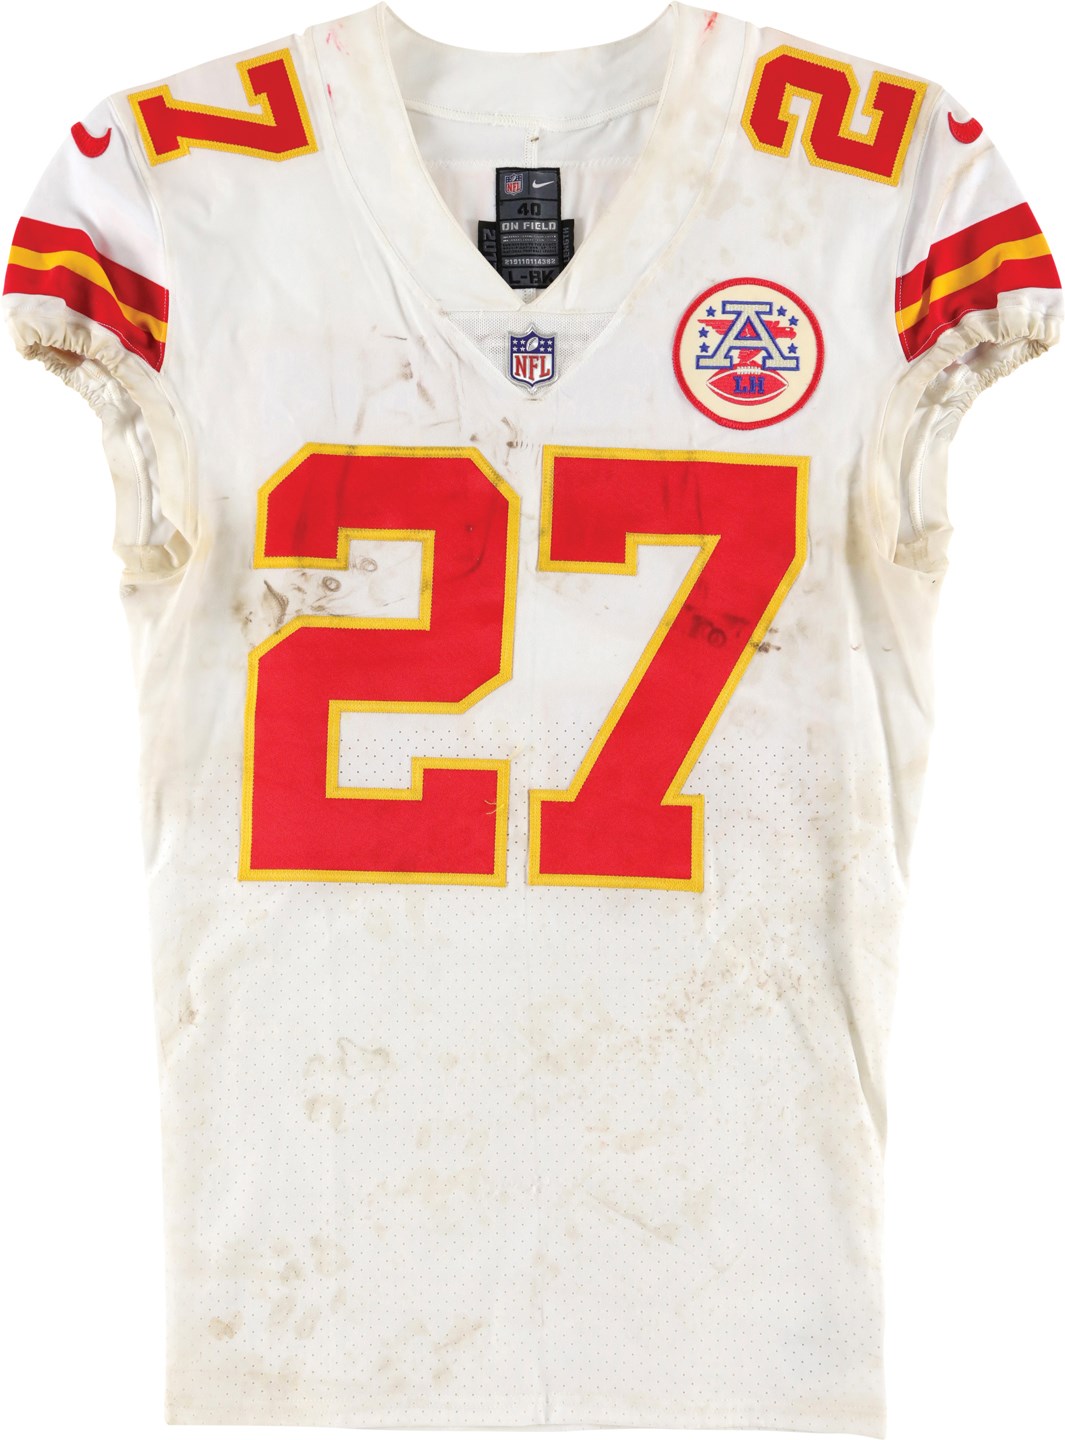 Football - 2017 Kareem Hunt Rookie Kansas City Chiefs Unwashed Game Worn Jersey - Photo-Matched to Patrick Mahomes' First Career Start